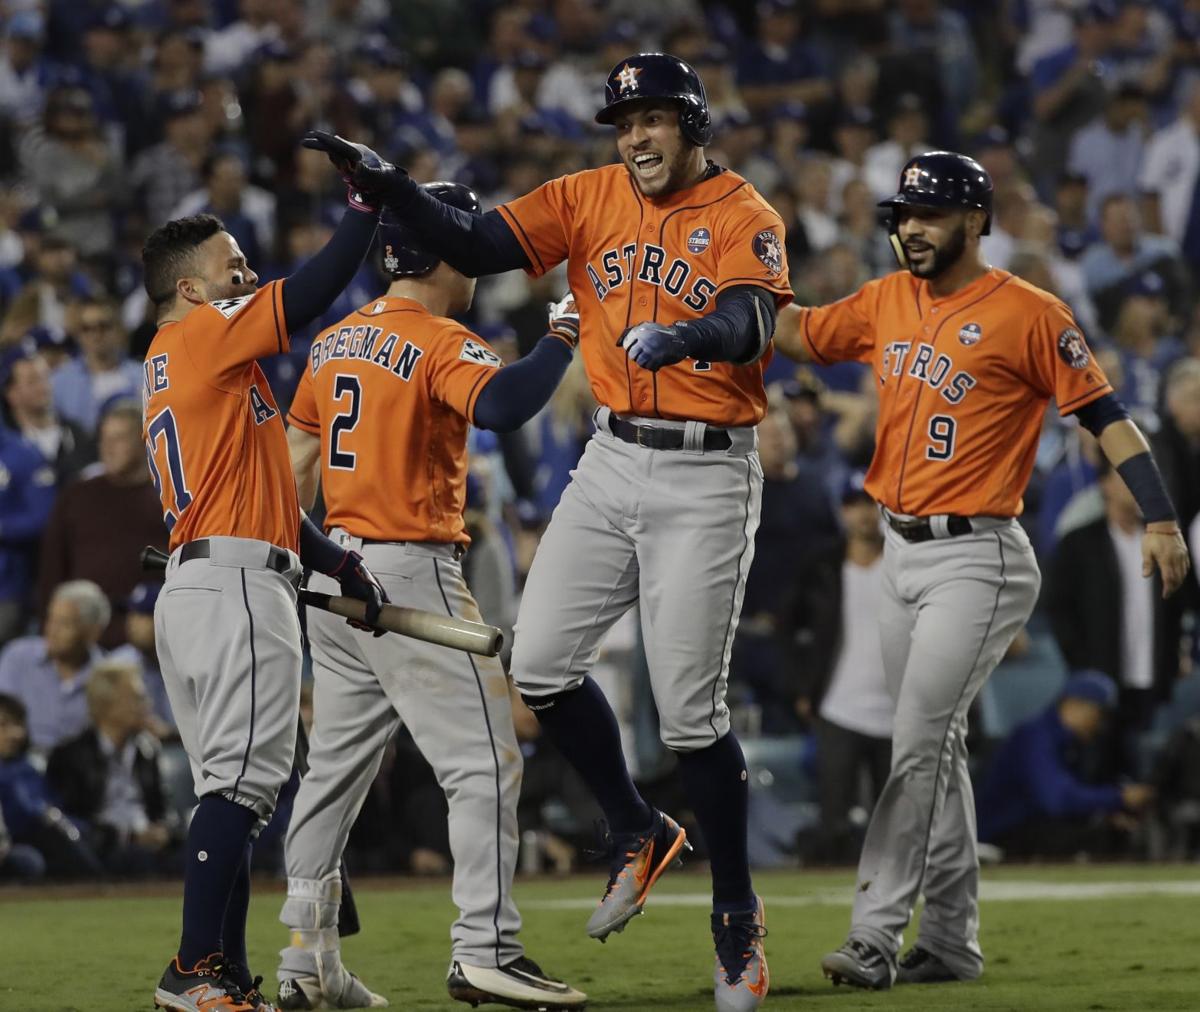 Astros come through for greatest moment in Houston sports history